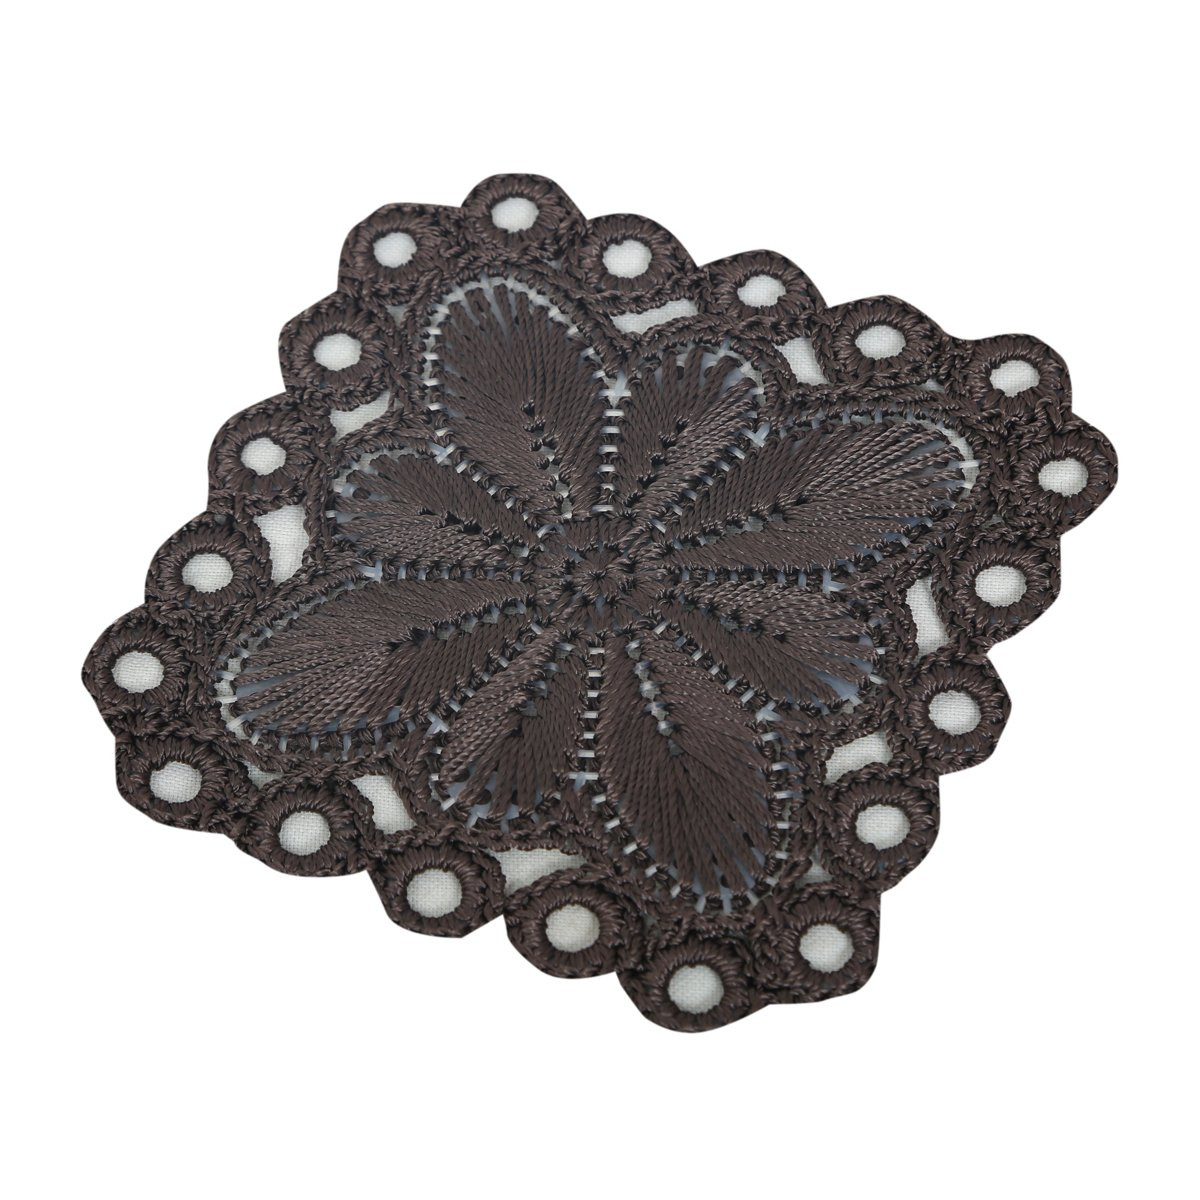 Kuber Industries Flower Design Handmade Square Cotton Coaster For Kinds of Mugs and Cups,(Brown)